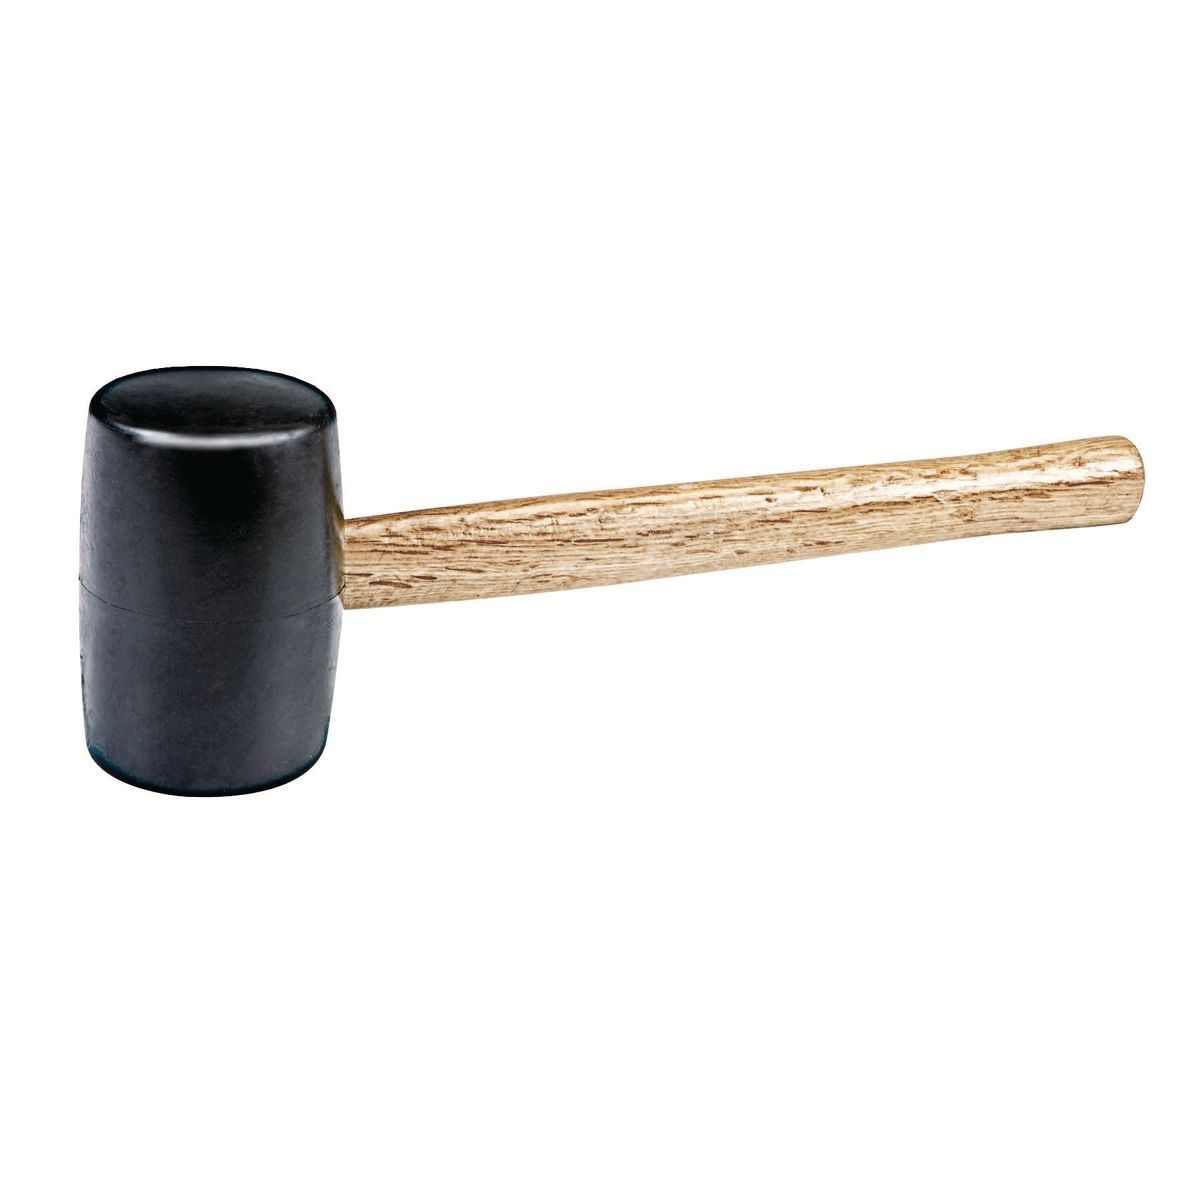 PITTSBURGH 1 lb. Rubber Mallet